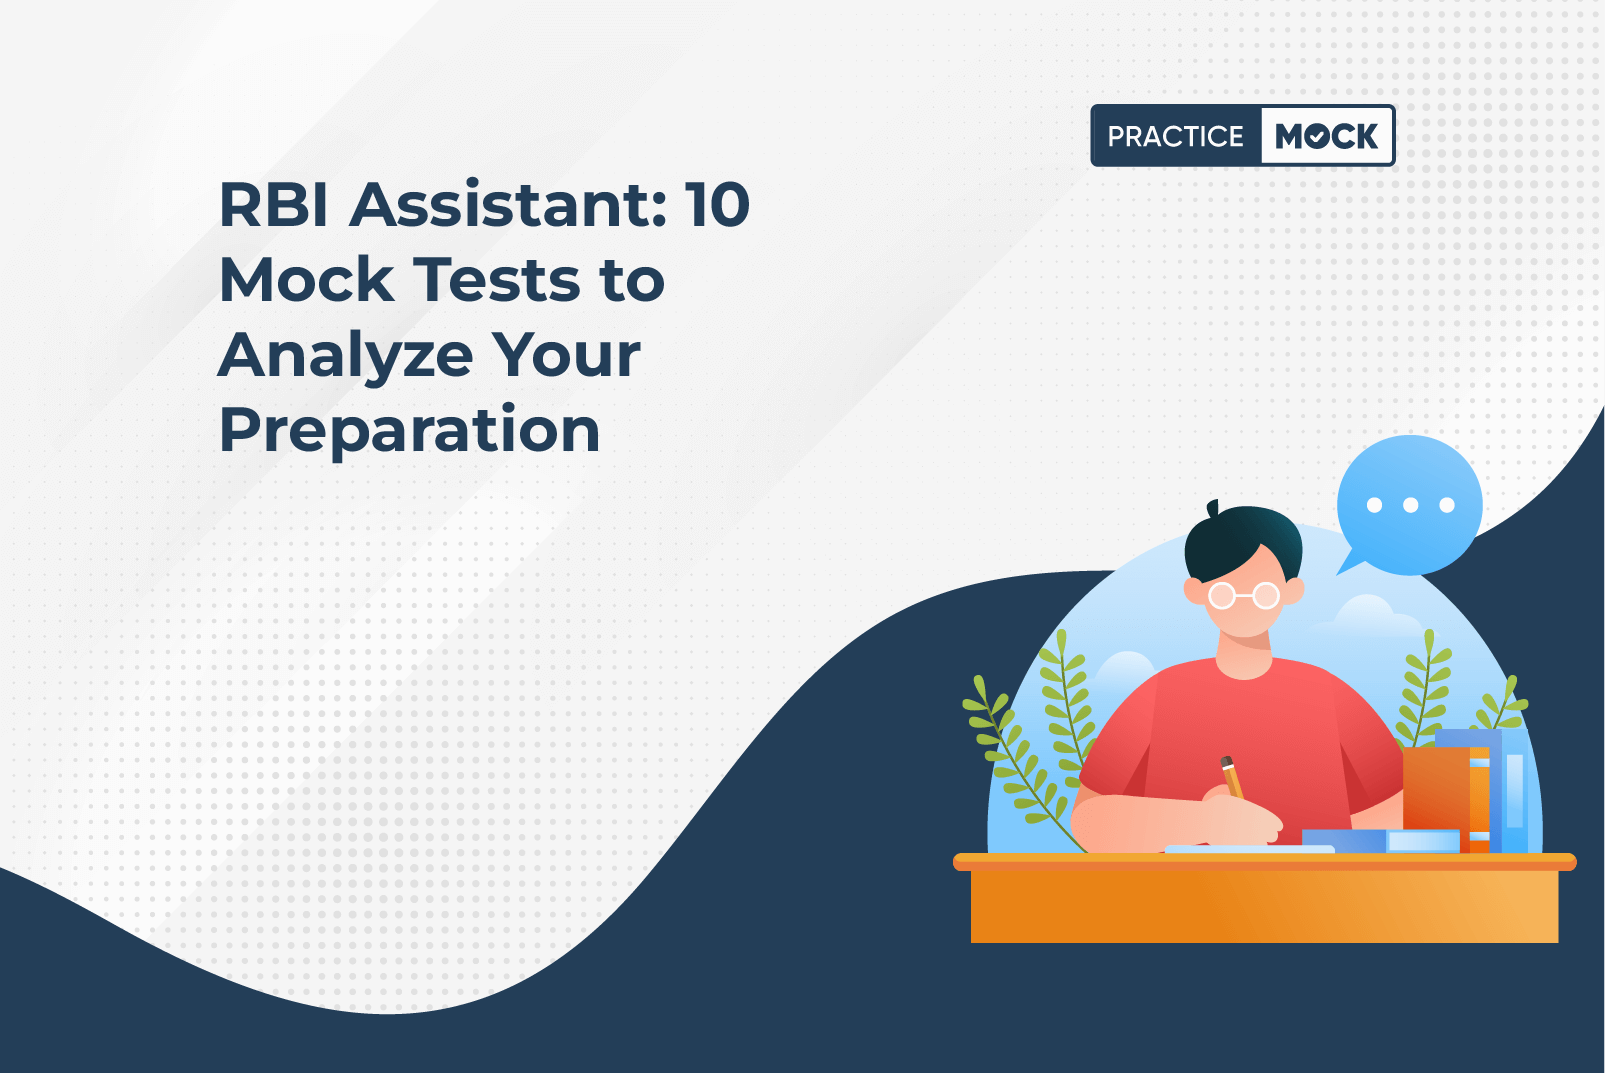 RBI Assistant 10 Mock Tests to Analyze Your Preparation (1)